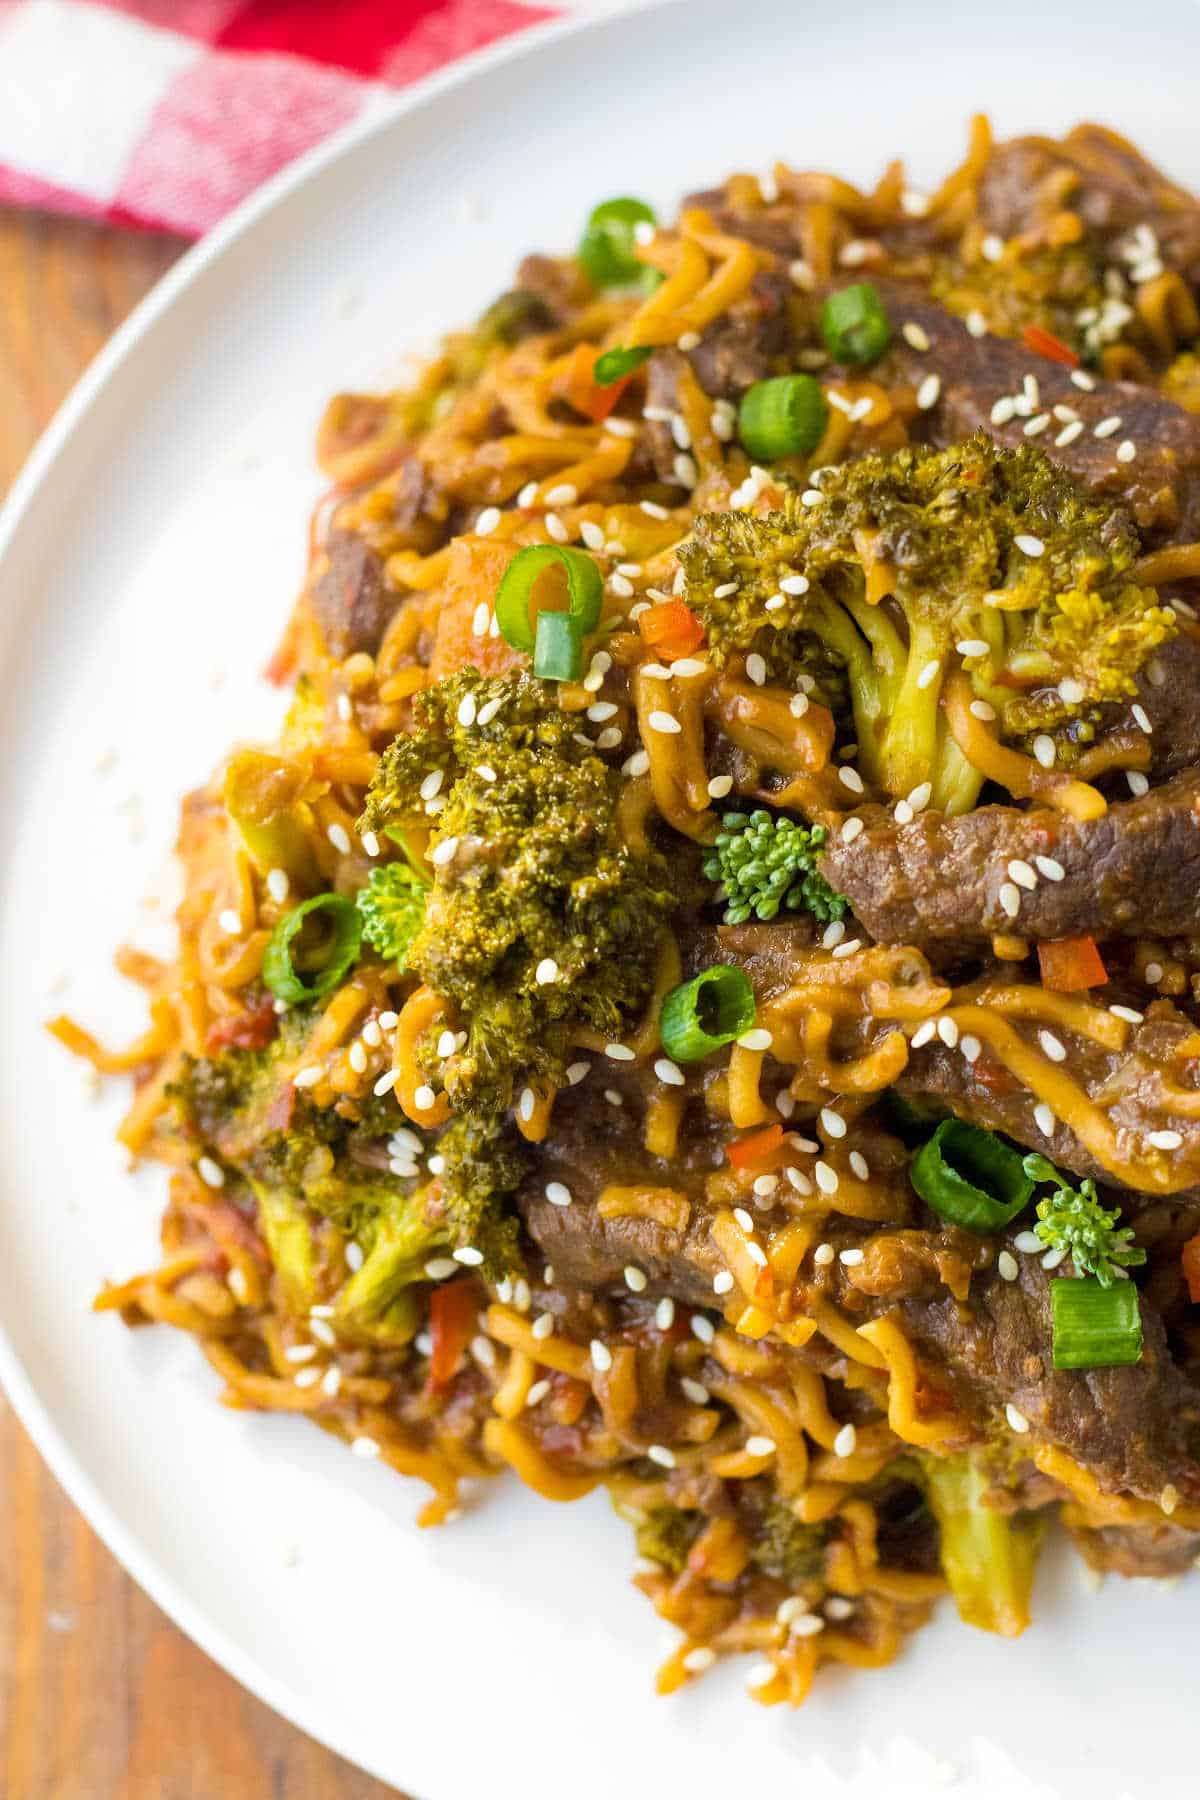 Beef and broccoli ramen on a plate.